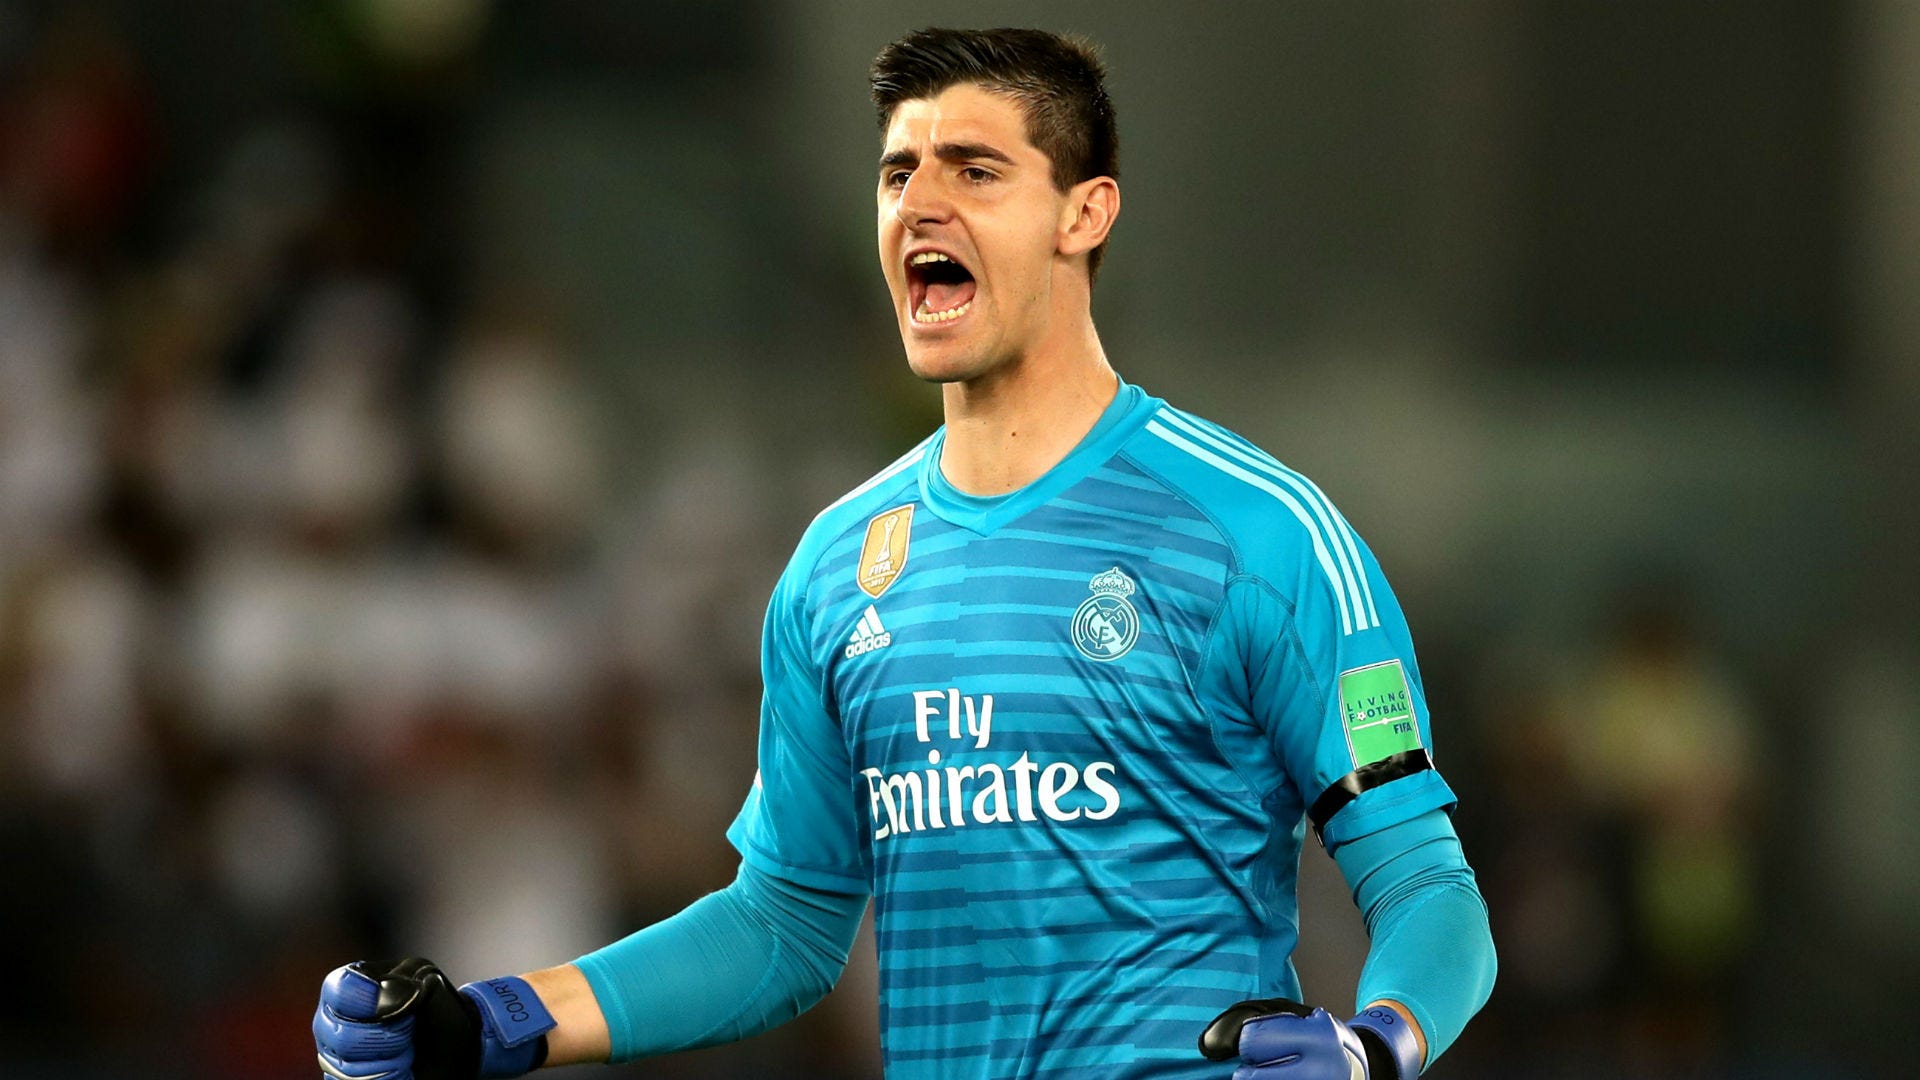 It was the correct decision - Courtois says justice was 'luckily